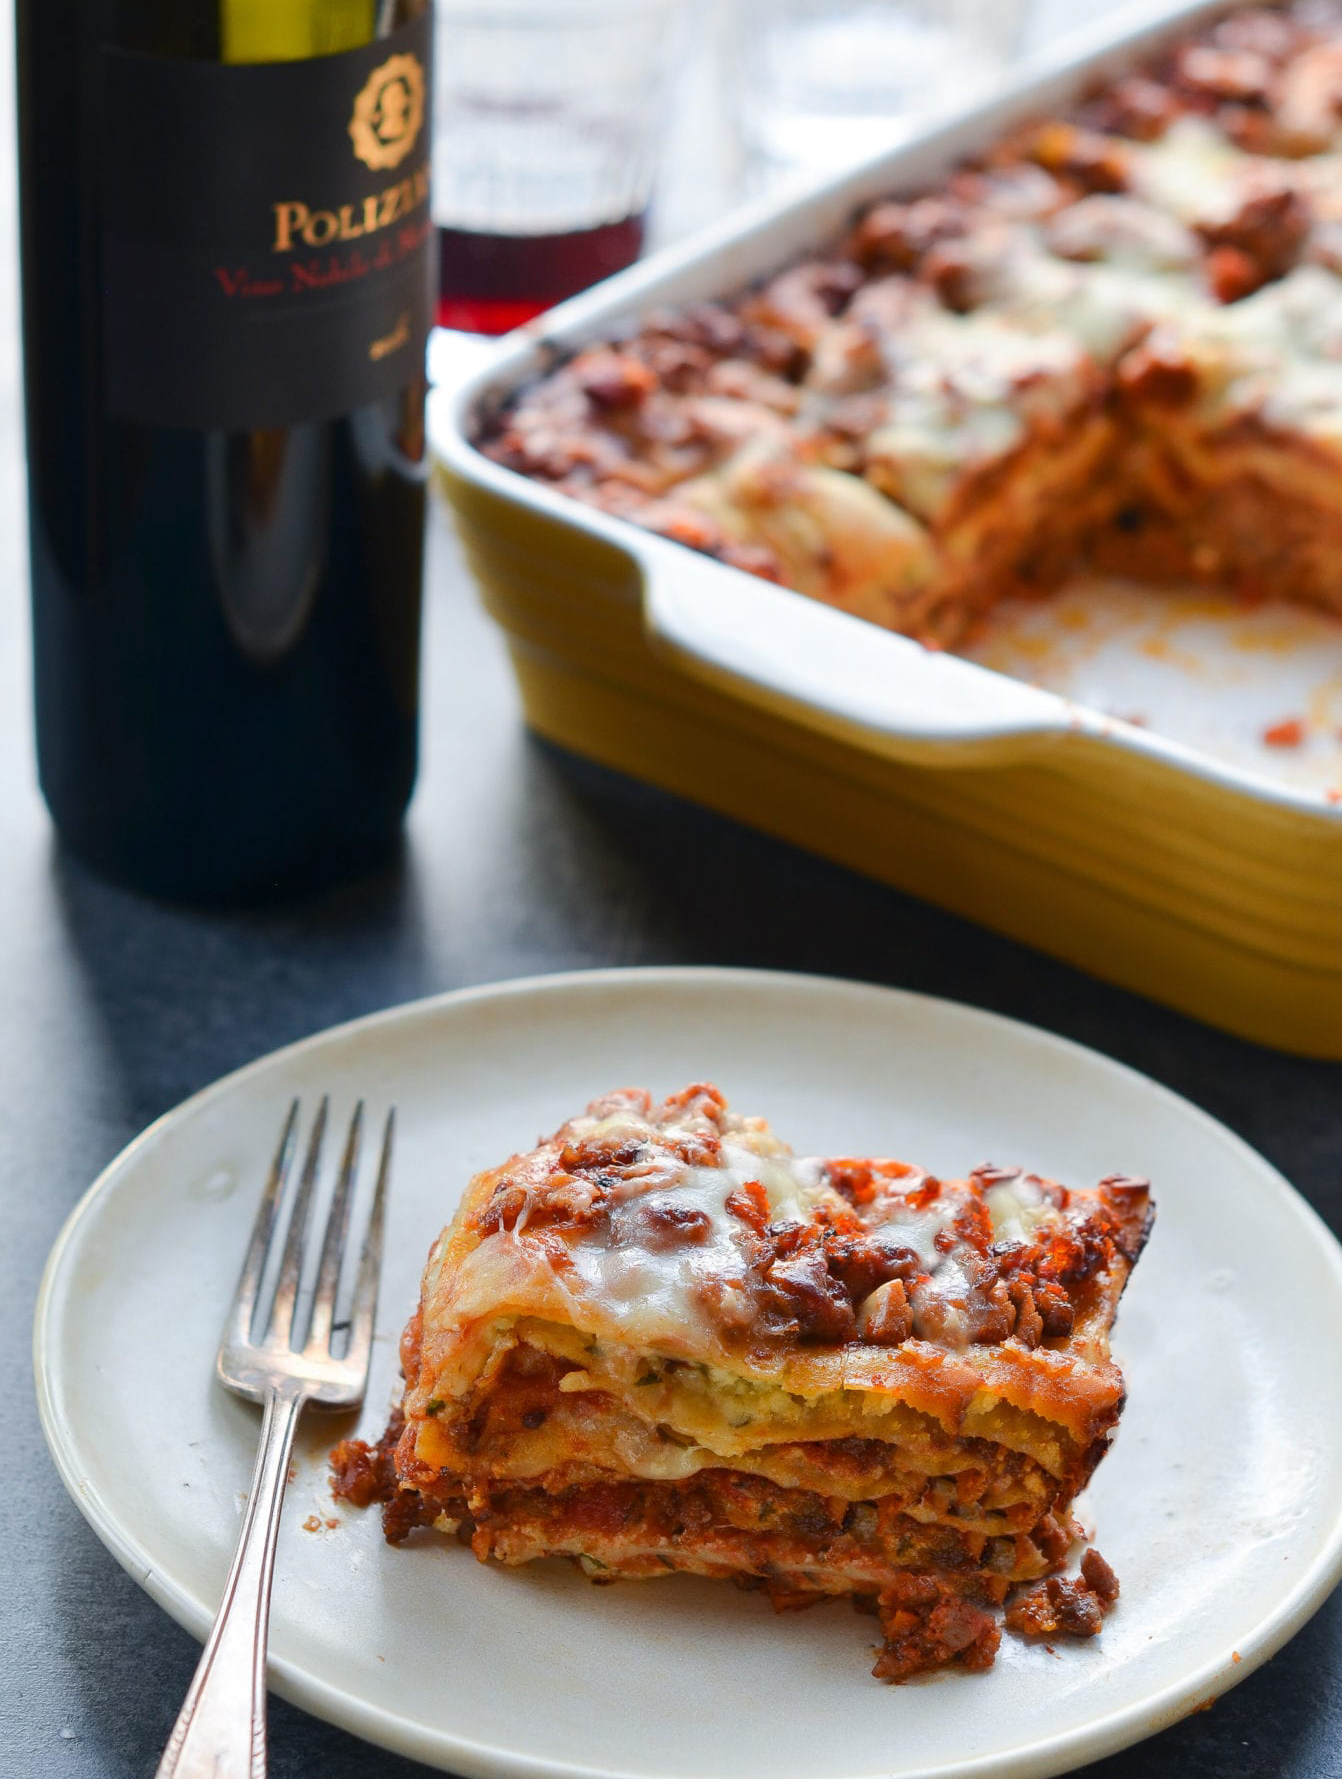 Everything You Need to Know to Find the Best Lasagna Pan is Right Here!